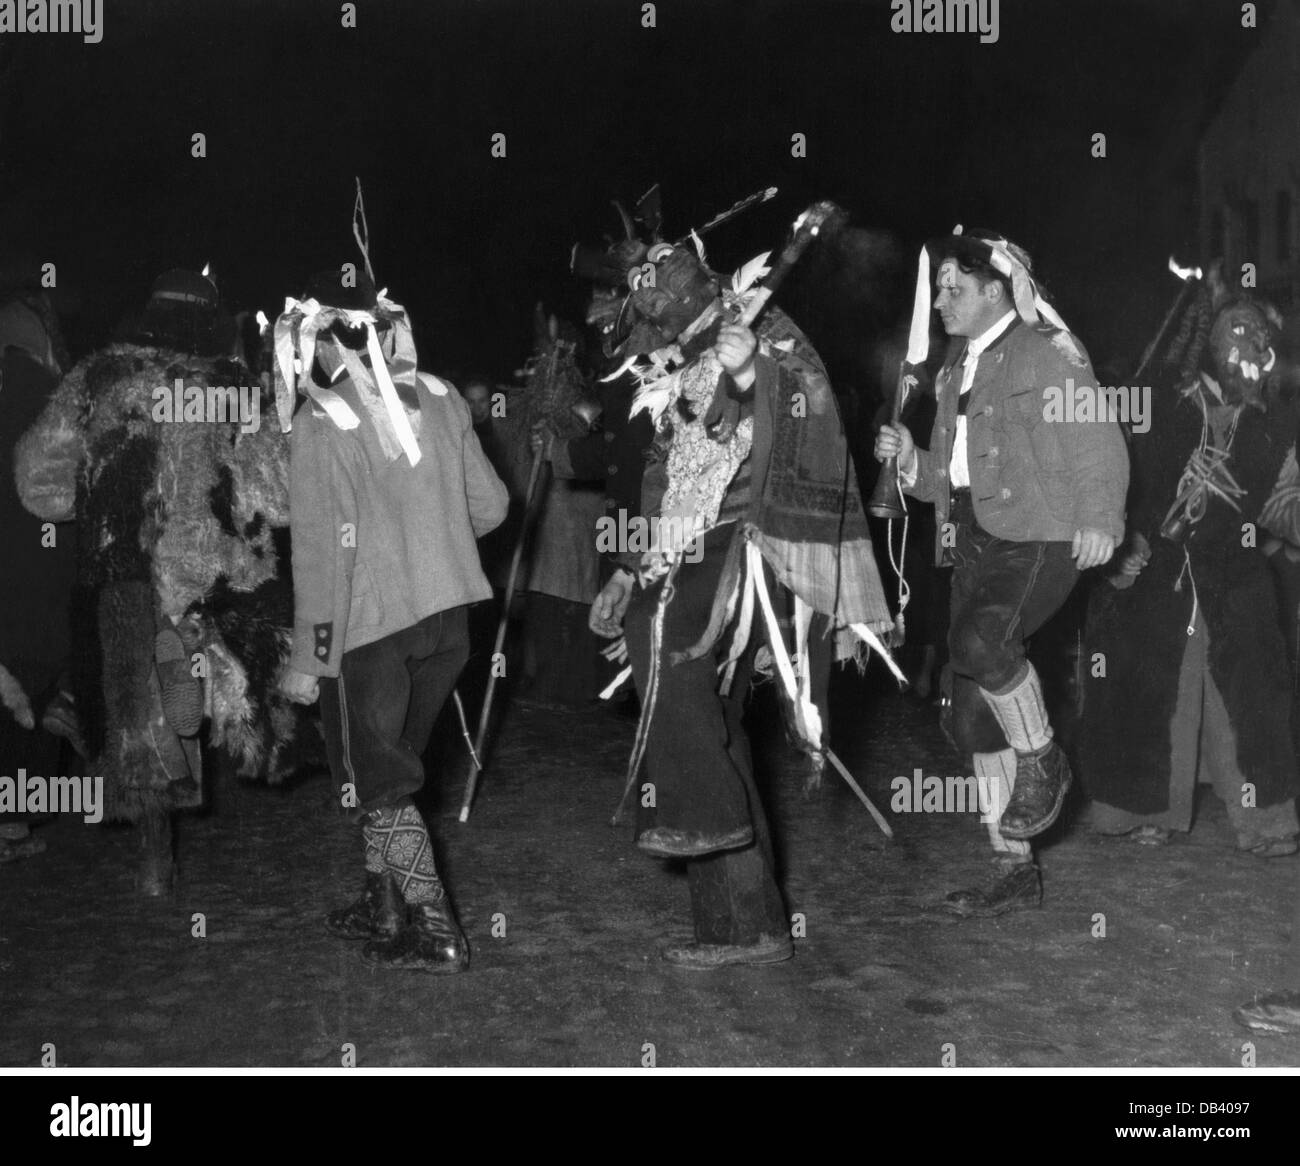 festivities, Perchtenlaufen, Perchten with and without wooden masks performing the traditional dance, Kirchseeon, 1954, Additional-Rights-Clearences-Not Available Stock Photo